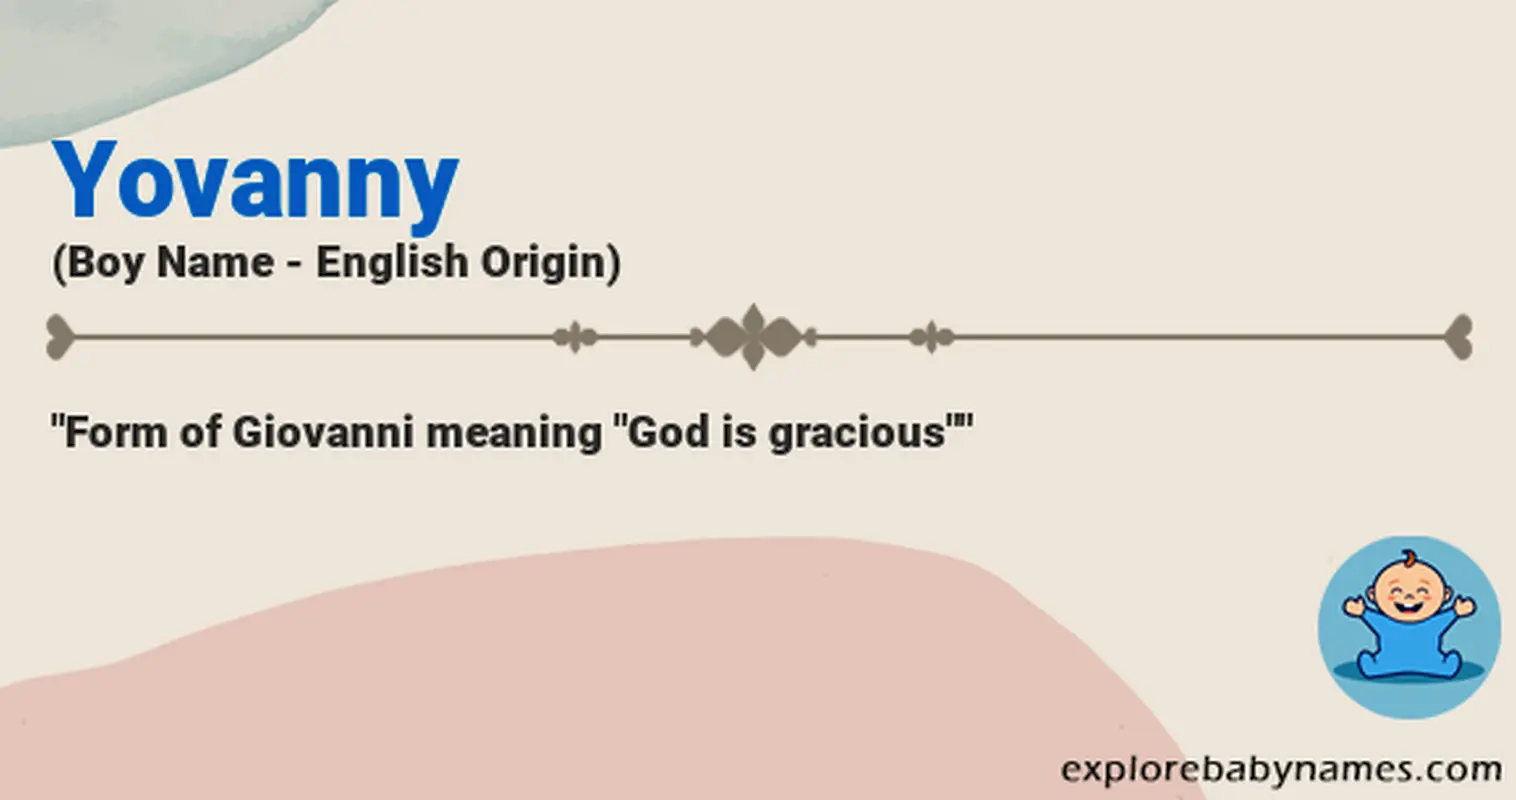 Meaning of Yovanny